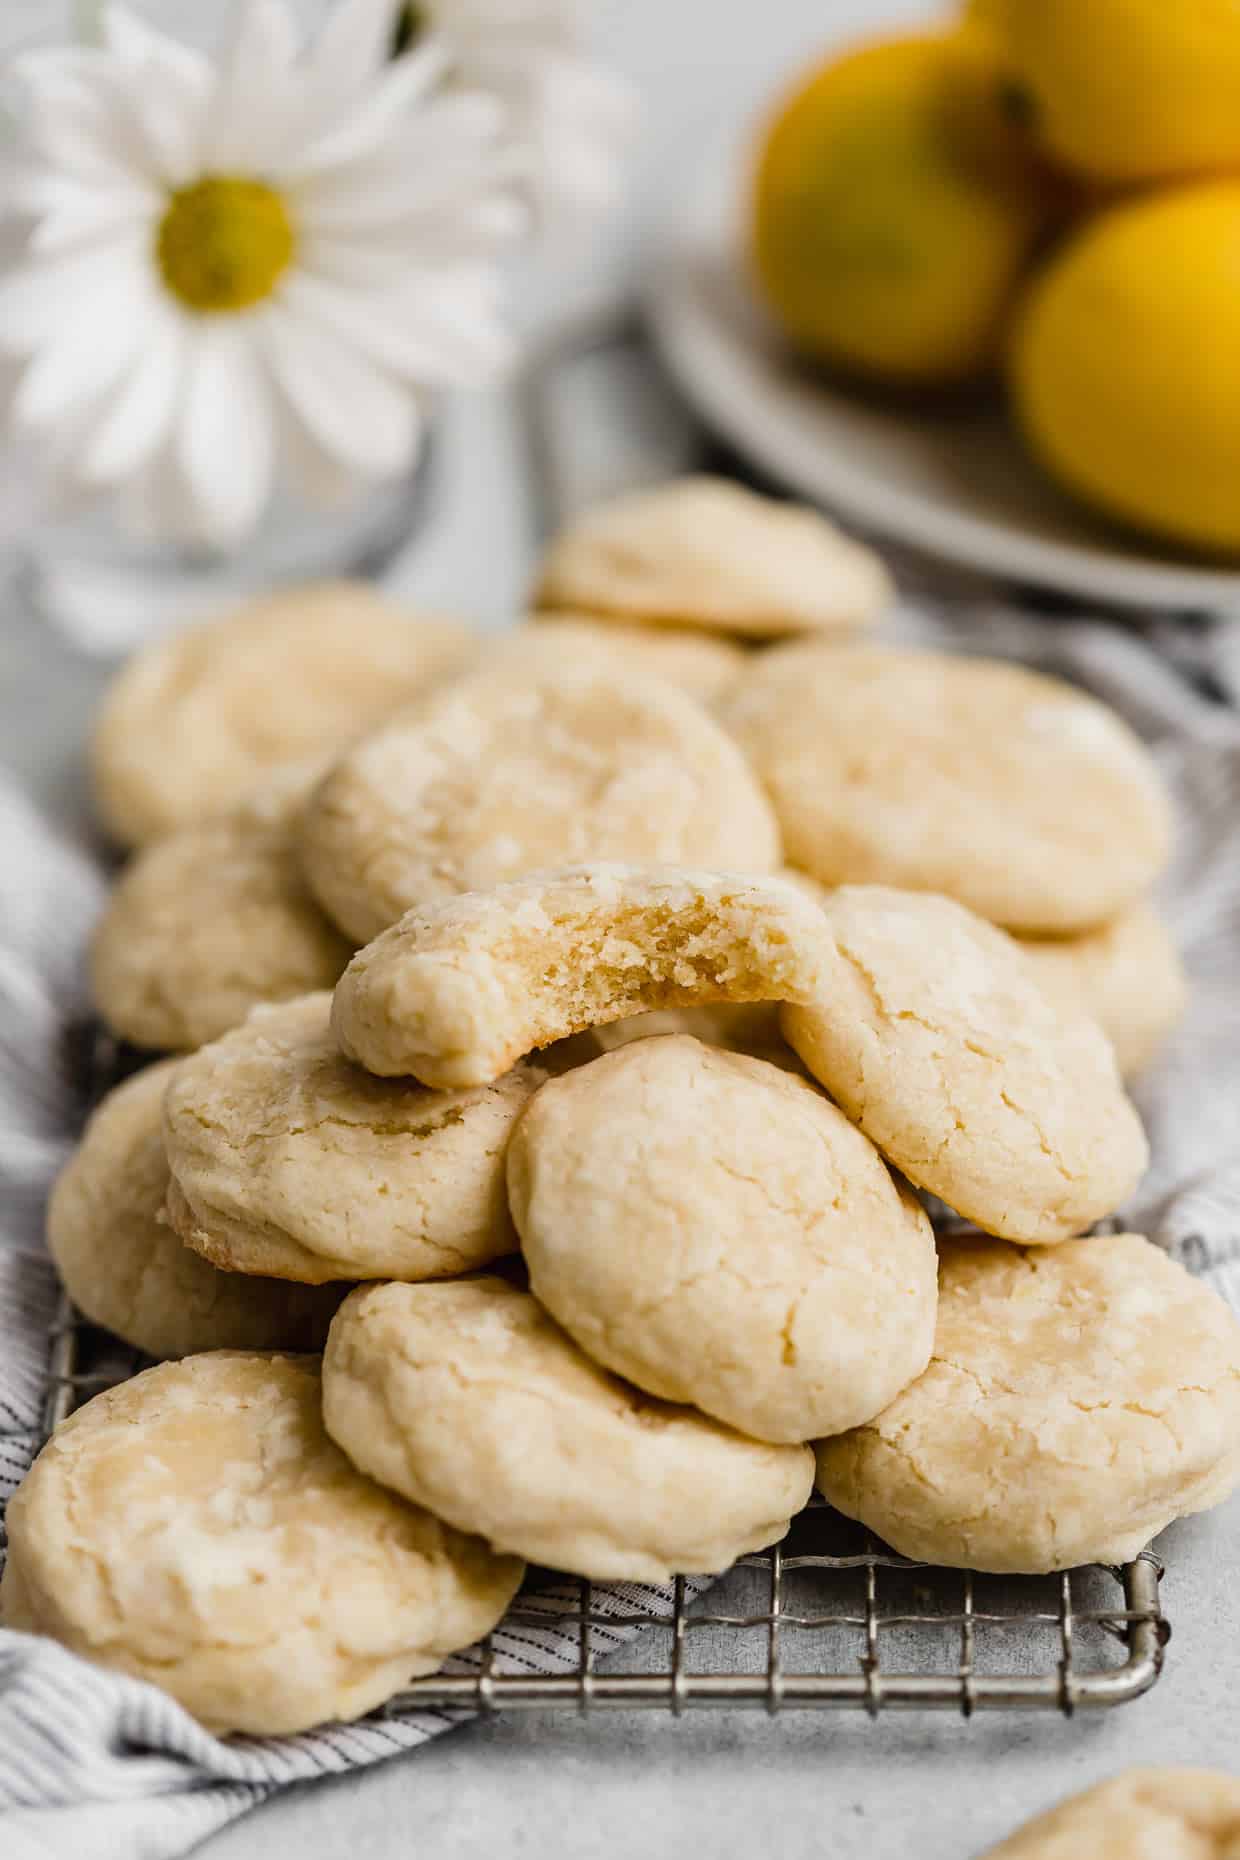 A lemon cookie with a bite taken out of it, stacked on a pile of other baked lemon cookies.